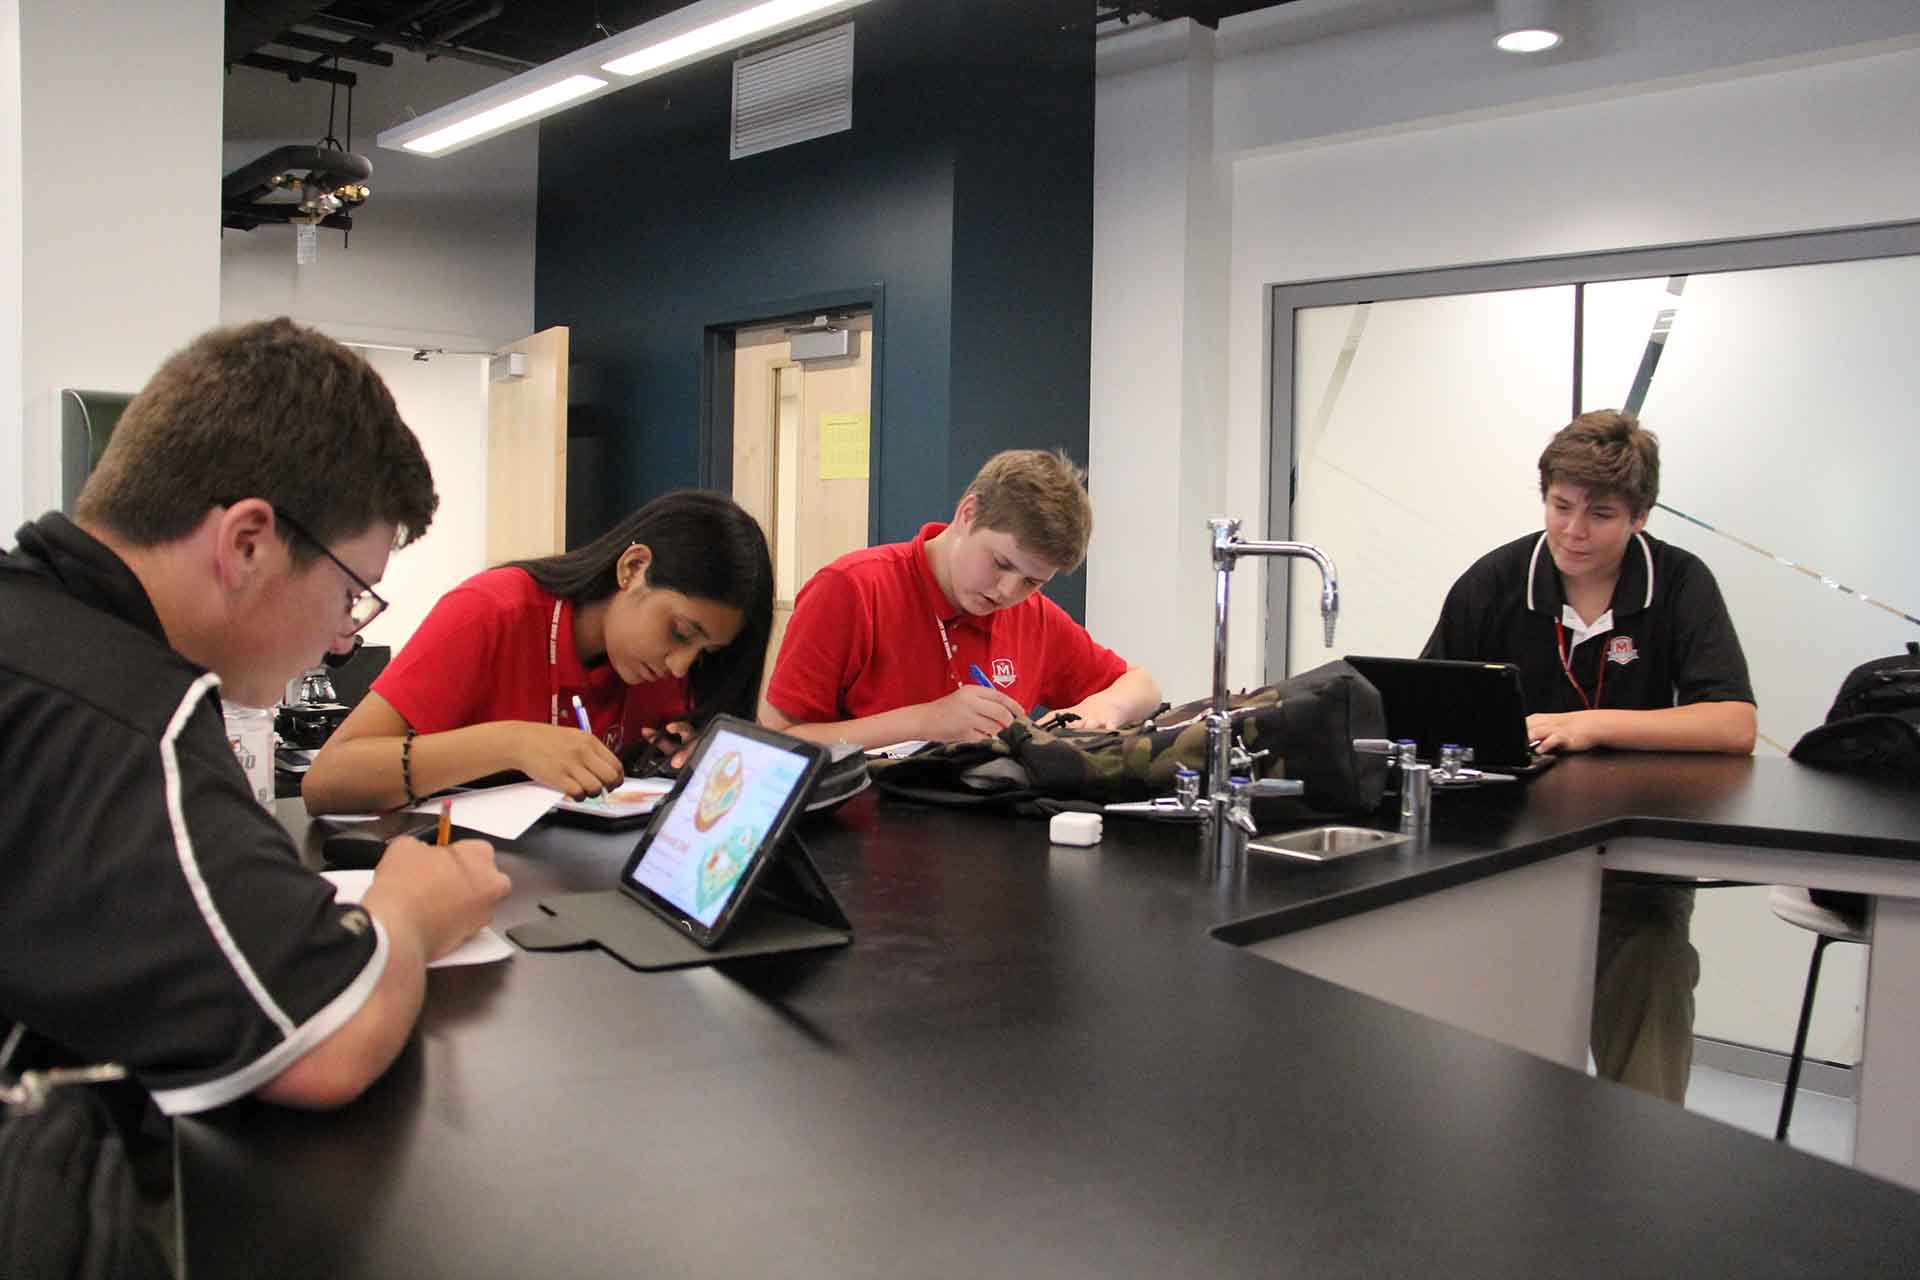 marist-science-wing-students-using-ipads-doing-classwork